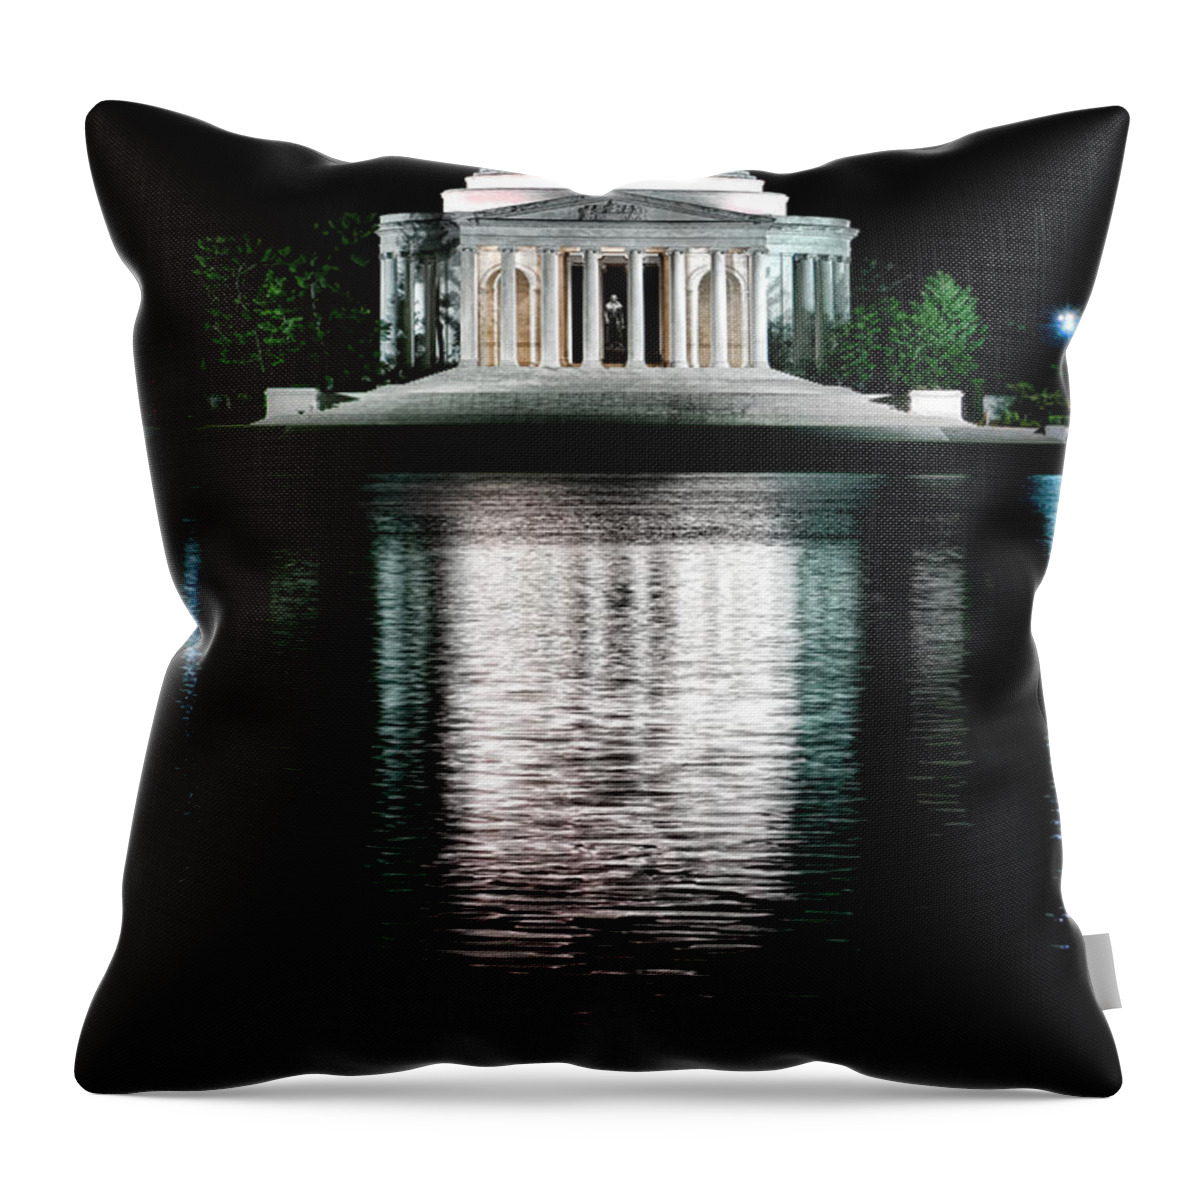 Thomas Throw Pillow featuring the photograph Thomas Jefferson Forever by Olivier Le Queinec